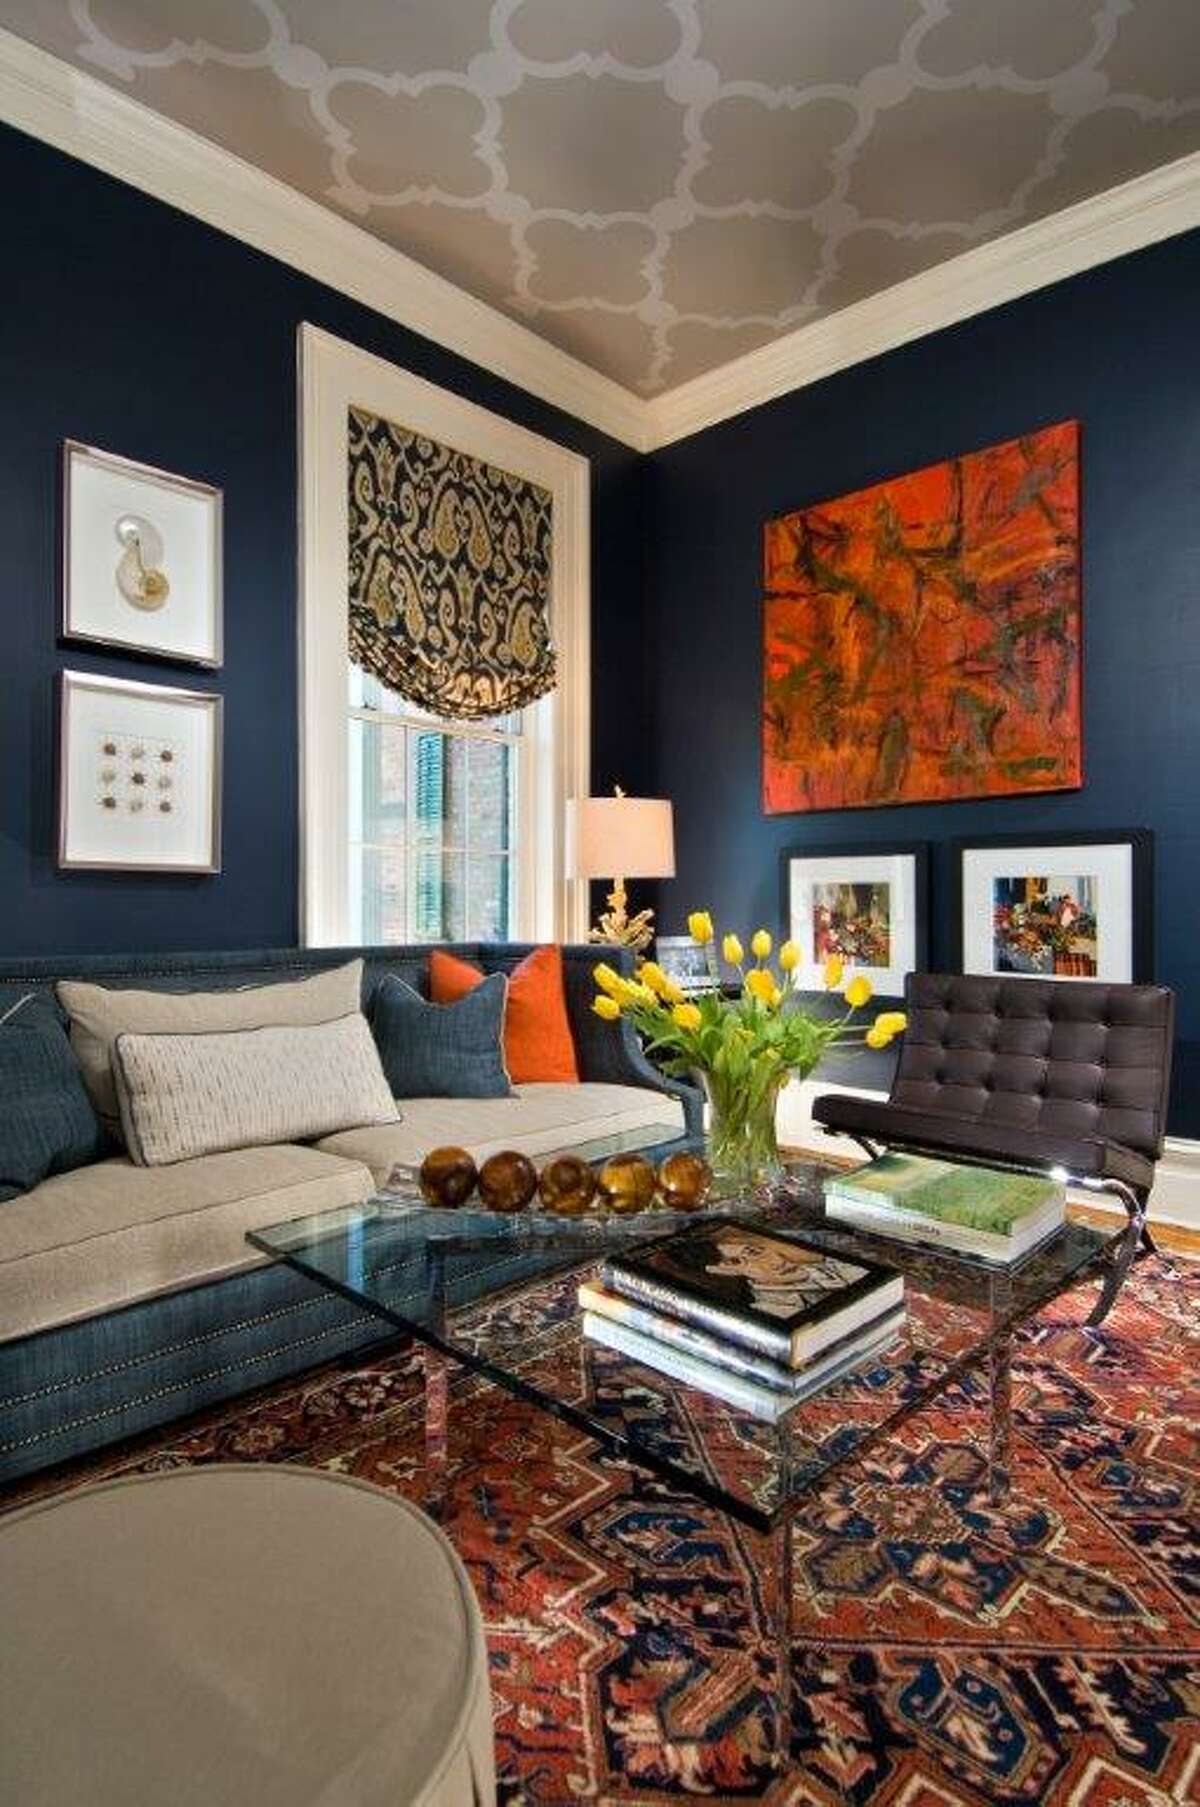 This den was a favorite design for Patricia Richards of Blairhouse Interiors. (Provided)